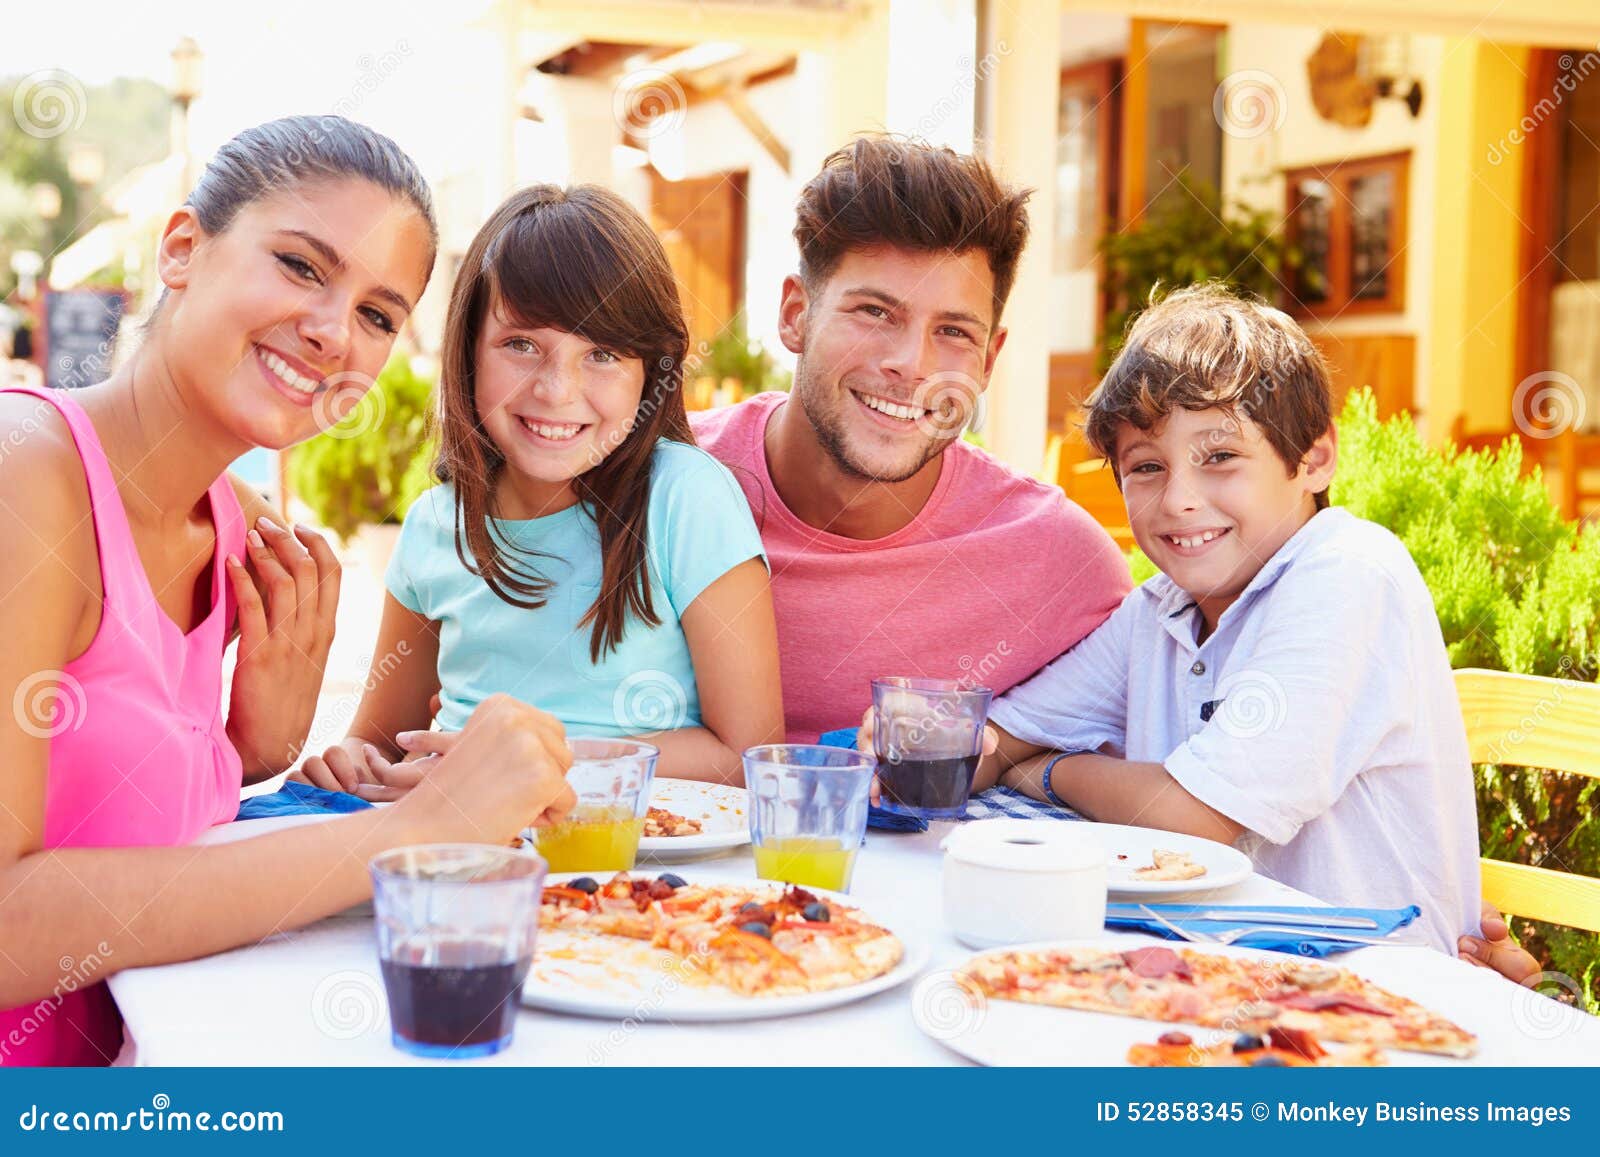 Portrait of Family Eating Meal at Outdoor Restaurant Stock Image